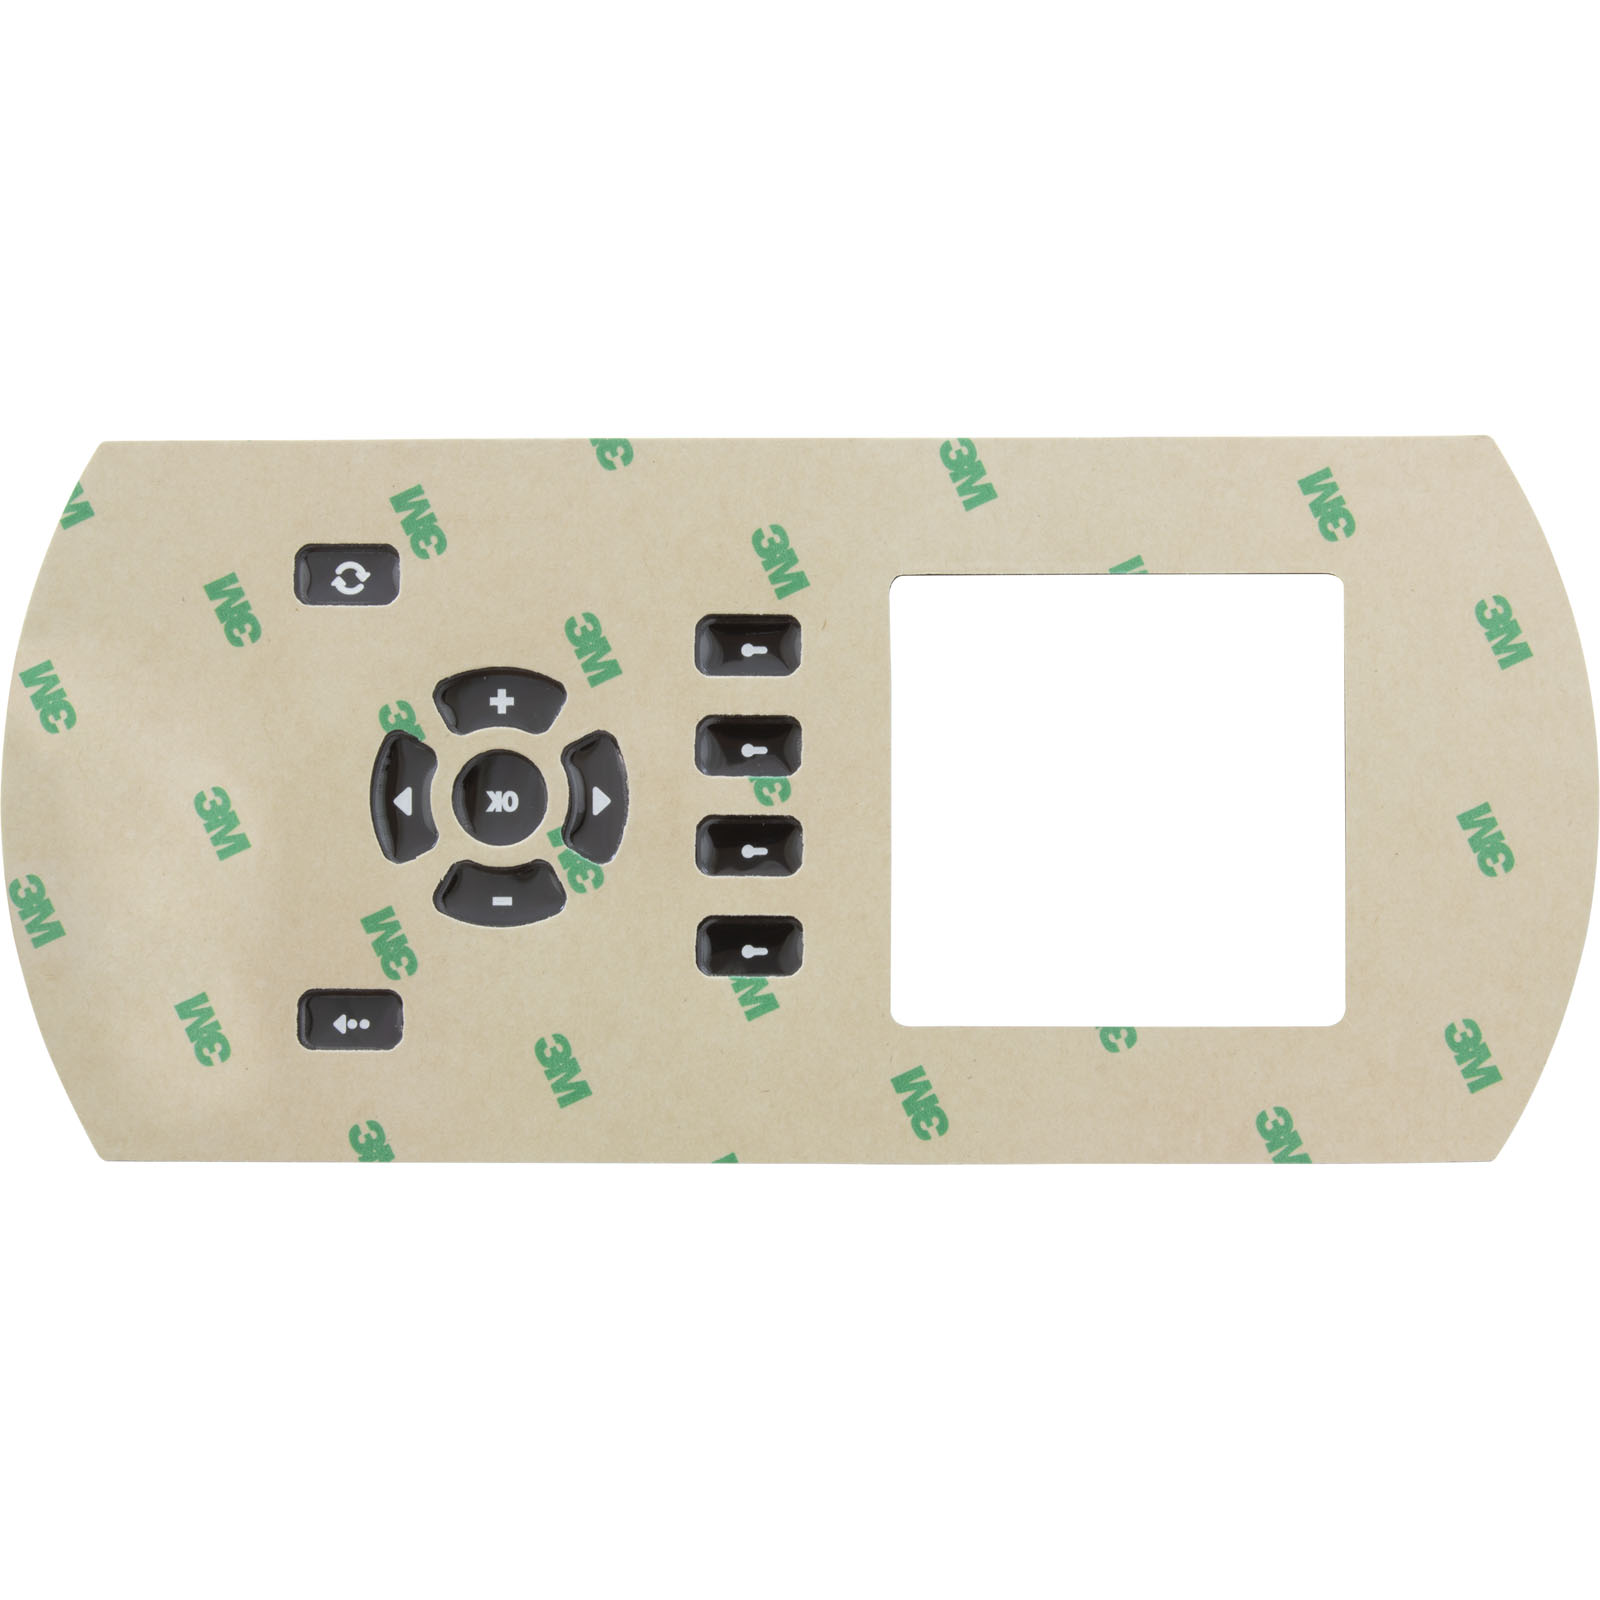 Picture of 9916-101381 Overlay Gecko In.k600-AE1 Graphic 11 Button